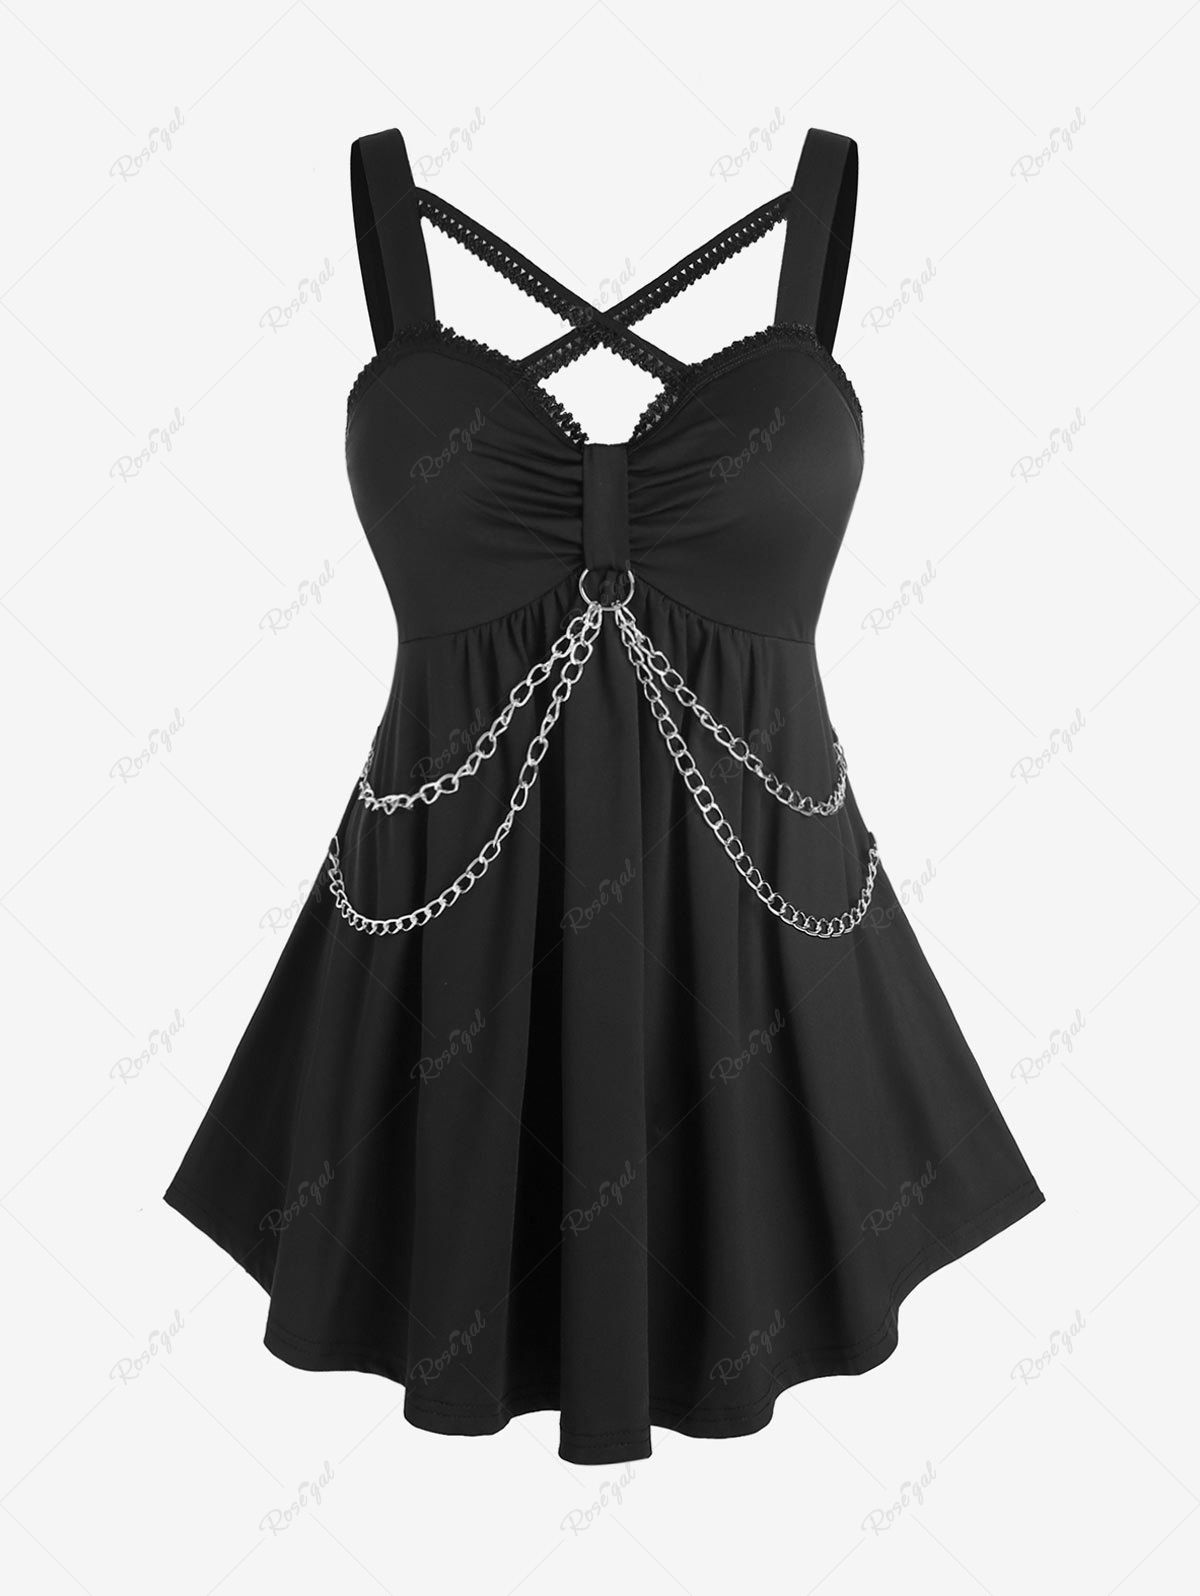 New Plus Size Backless Chains Criss Cross Solid Gothic Tank Top  